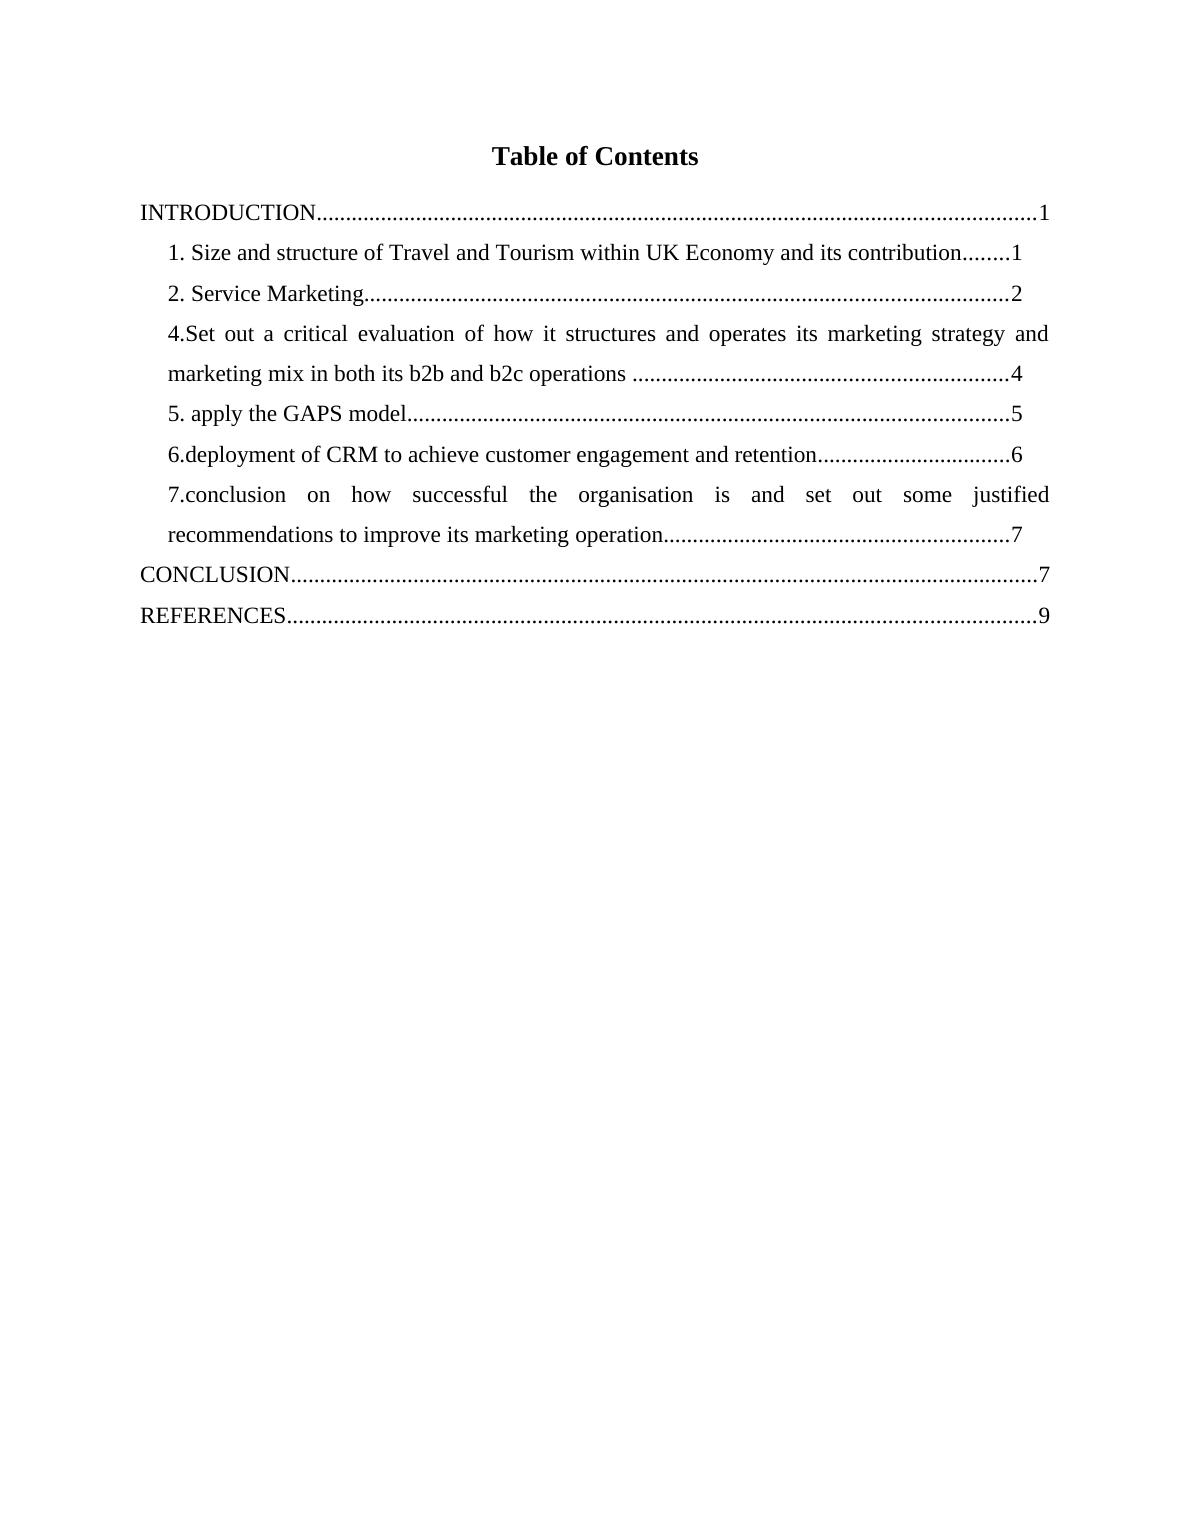 Business-to-Business Marketing Assignment (B2B)_2